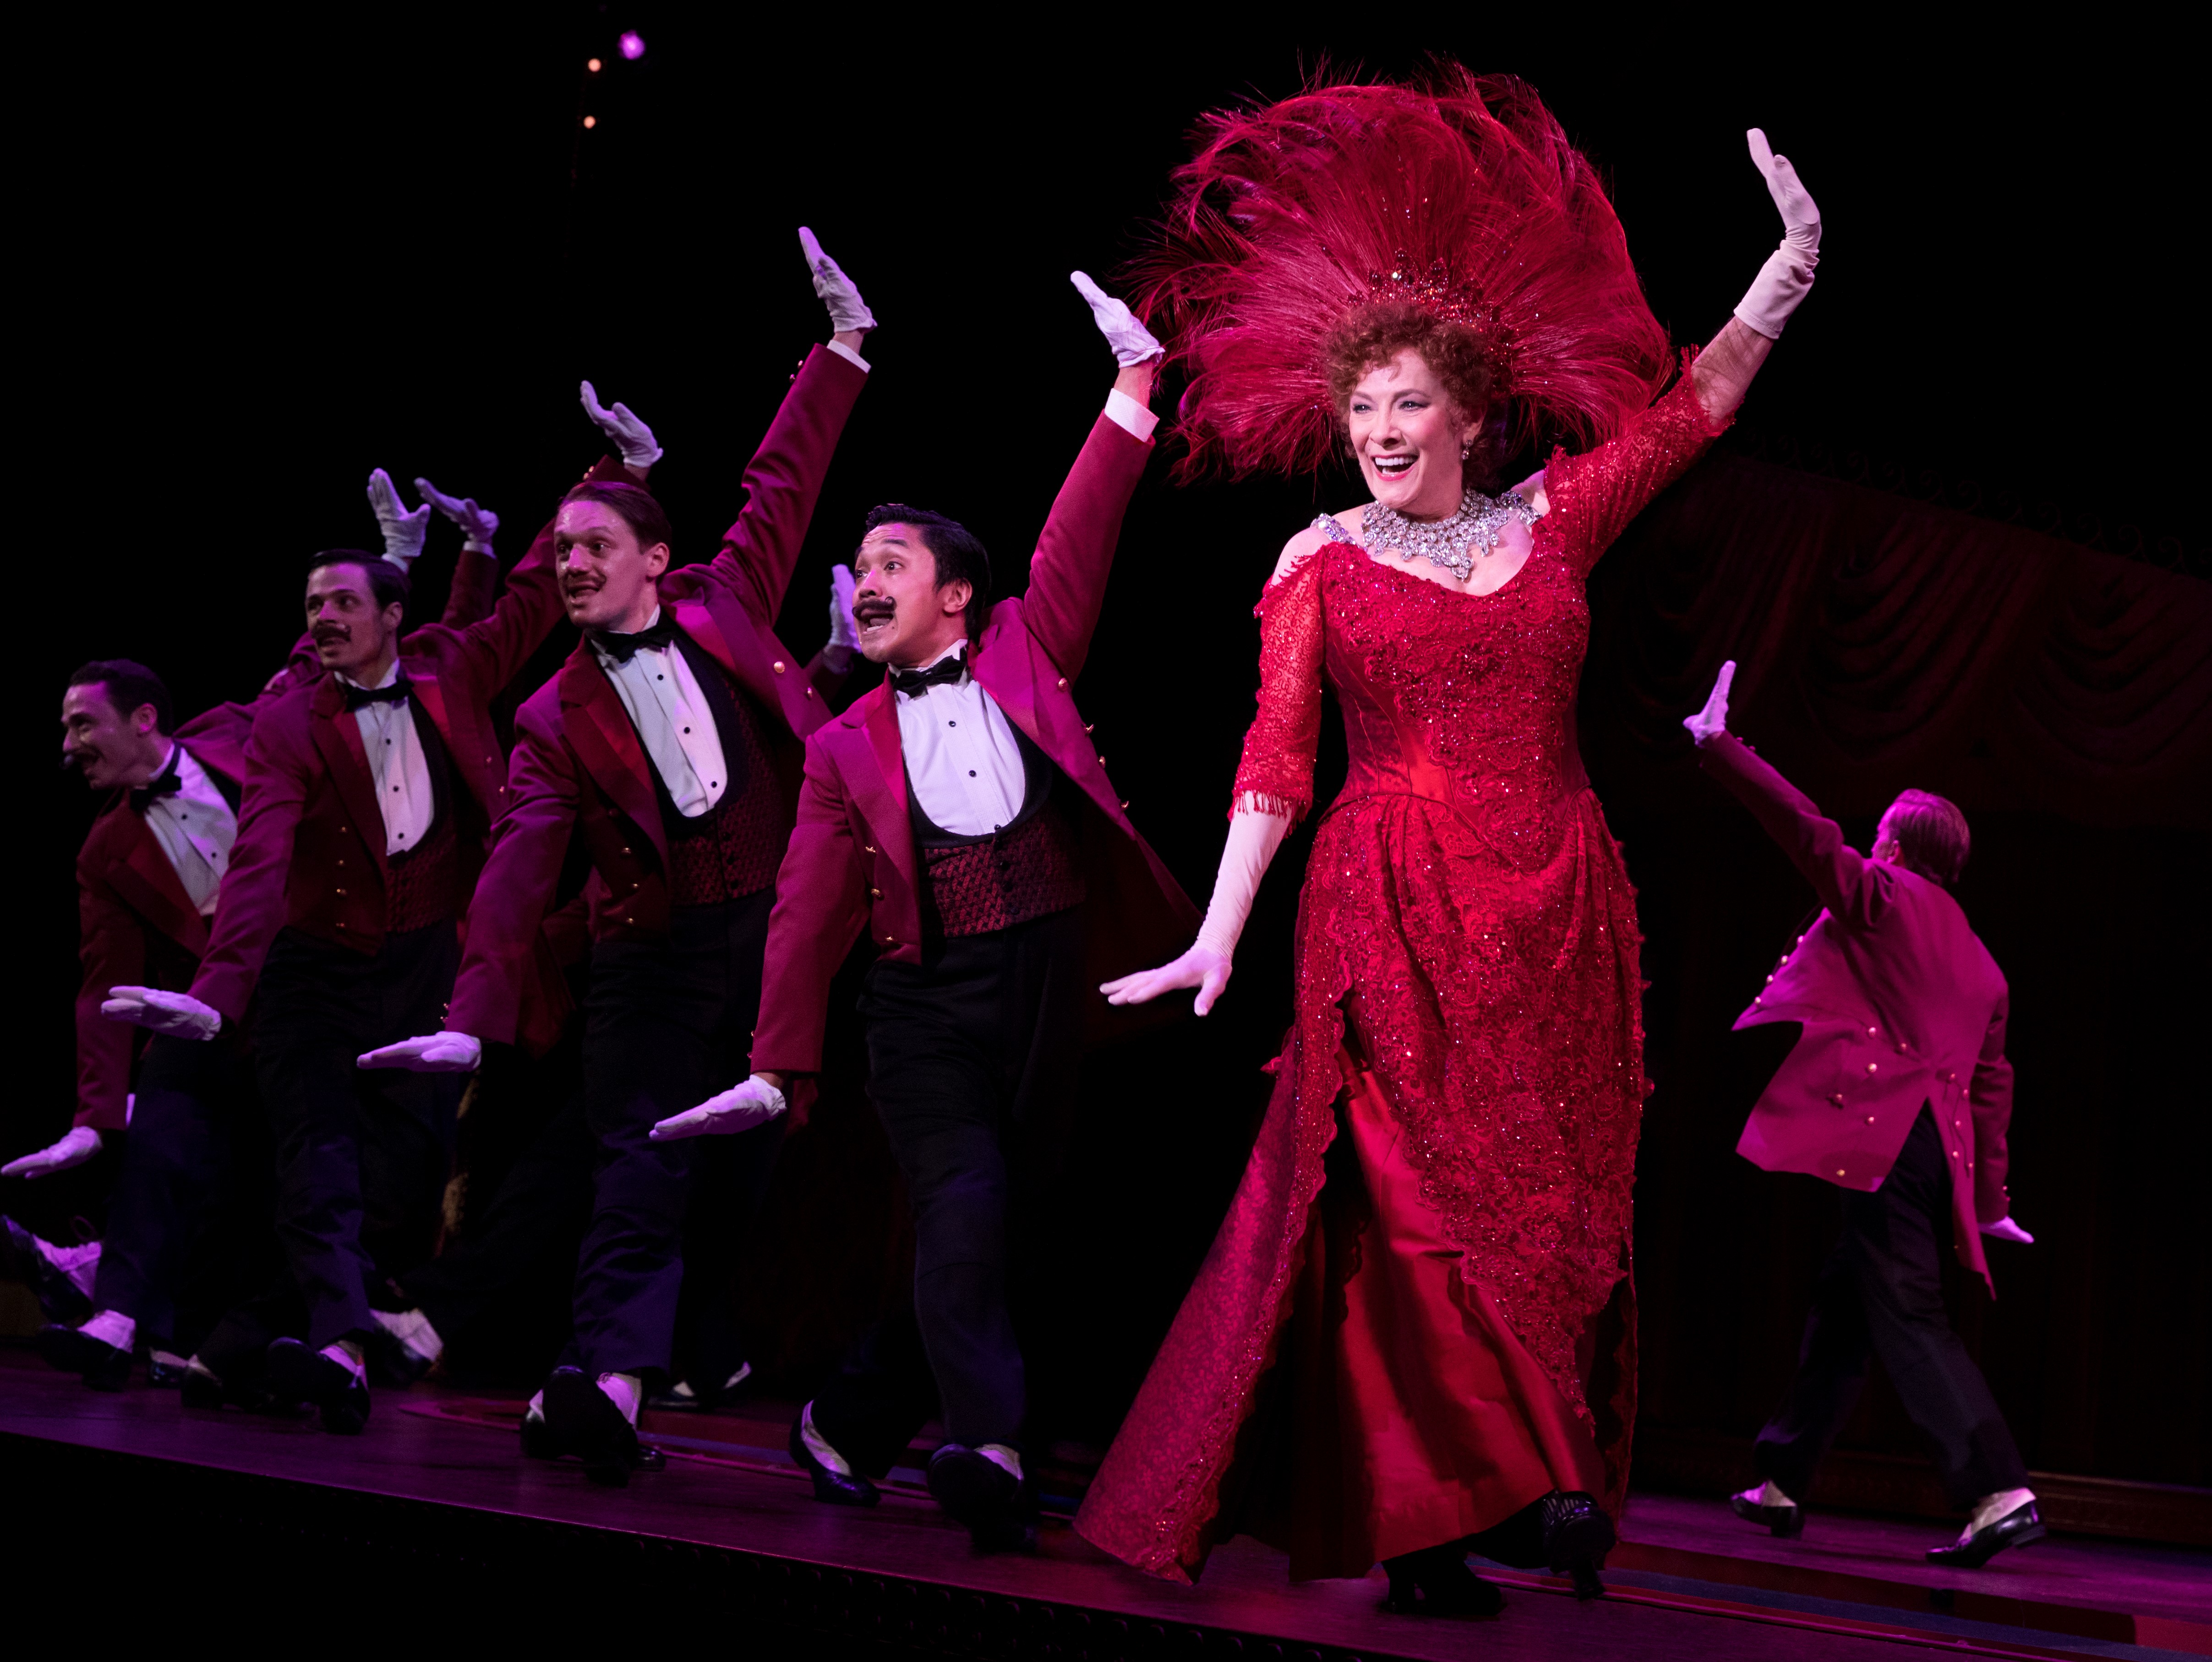 Dolly singing and dancing with the waiters in the "Hello Dolly!" number from the musical. Photo Credit: Julieta Cervantes